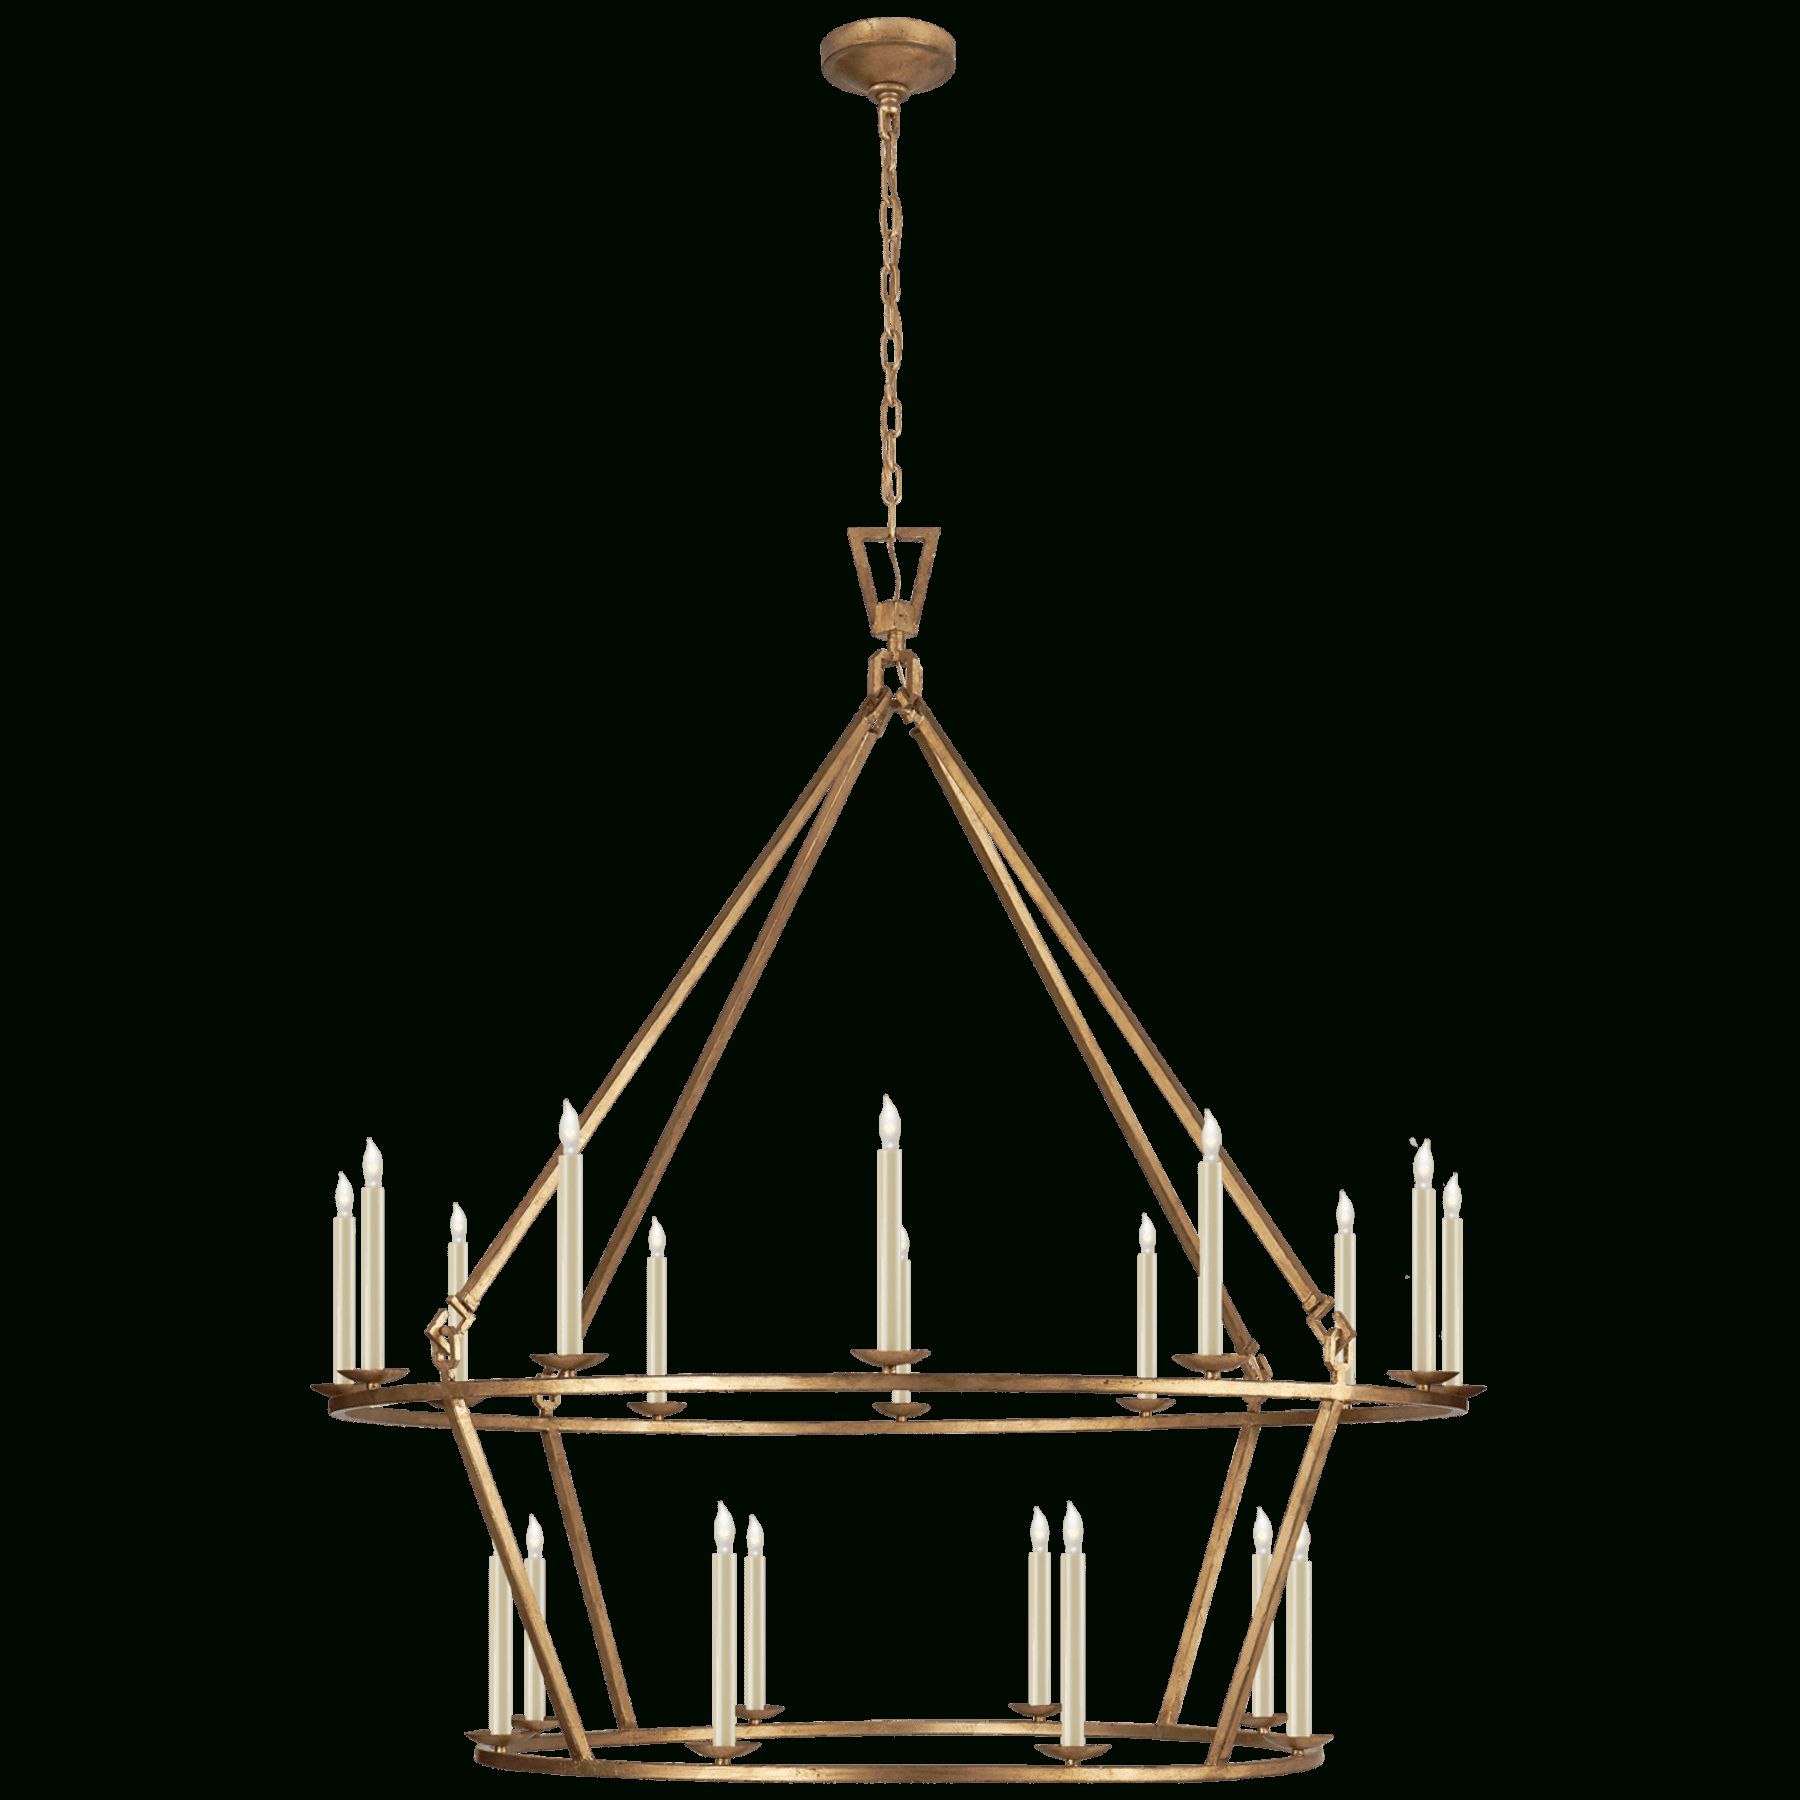 Darlana Extra Large Two Tier Chandelier | Circa Lighting With Regard To Marquette Two Tier Traditional Chandeliers (View 14 of 15)